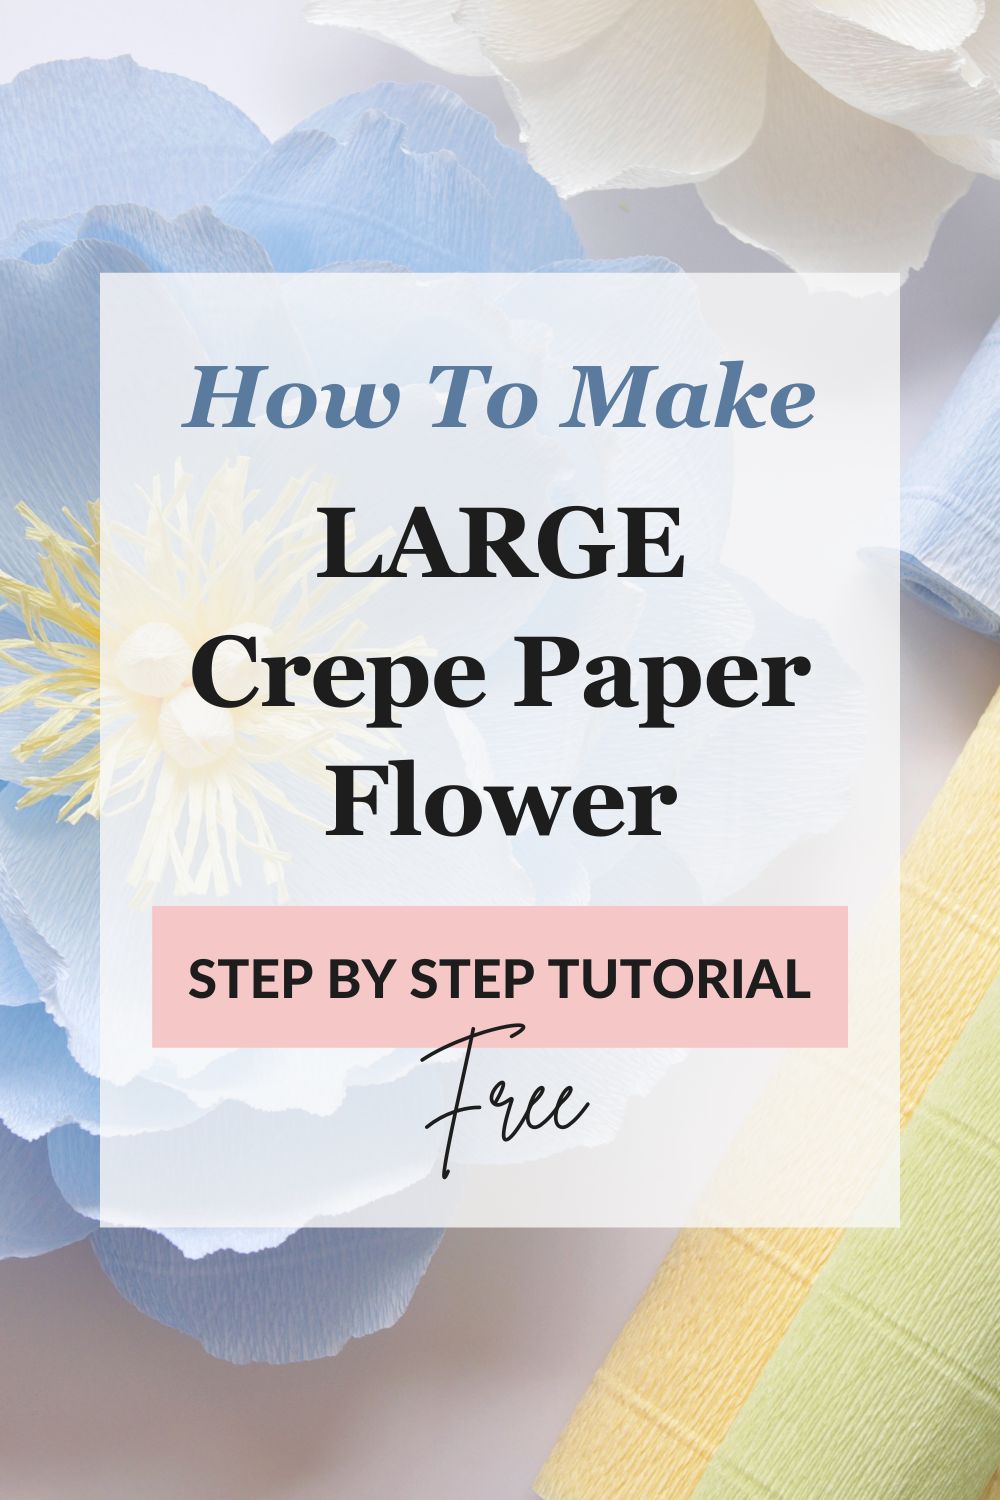 How to make large crepe paper flower